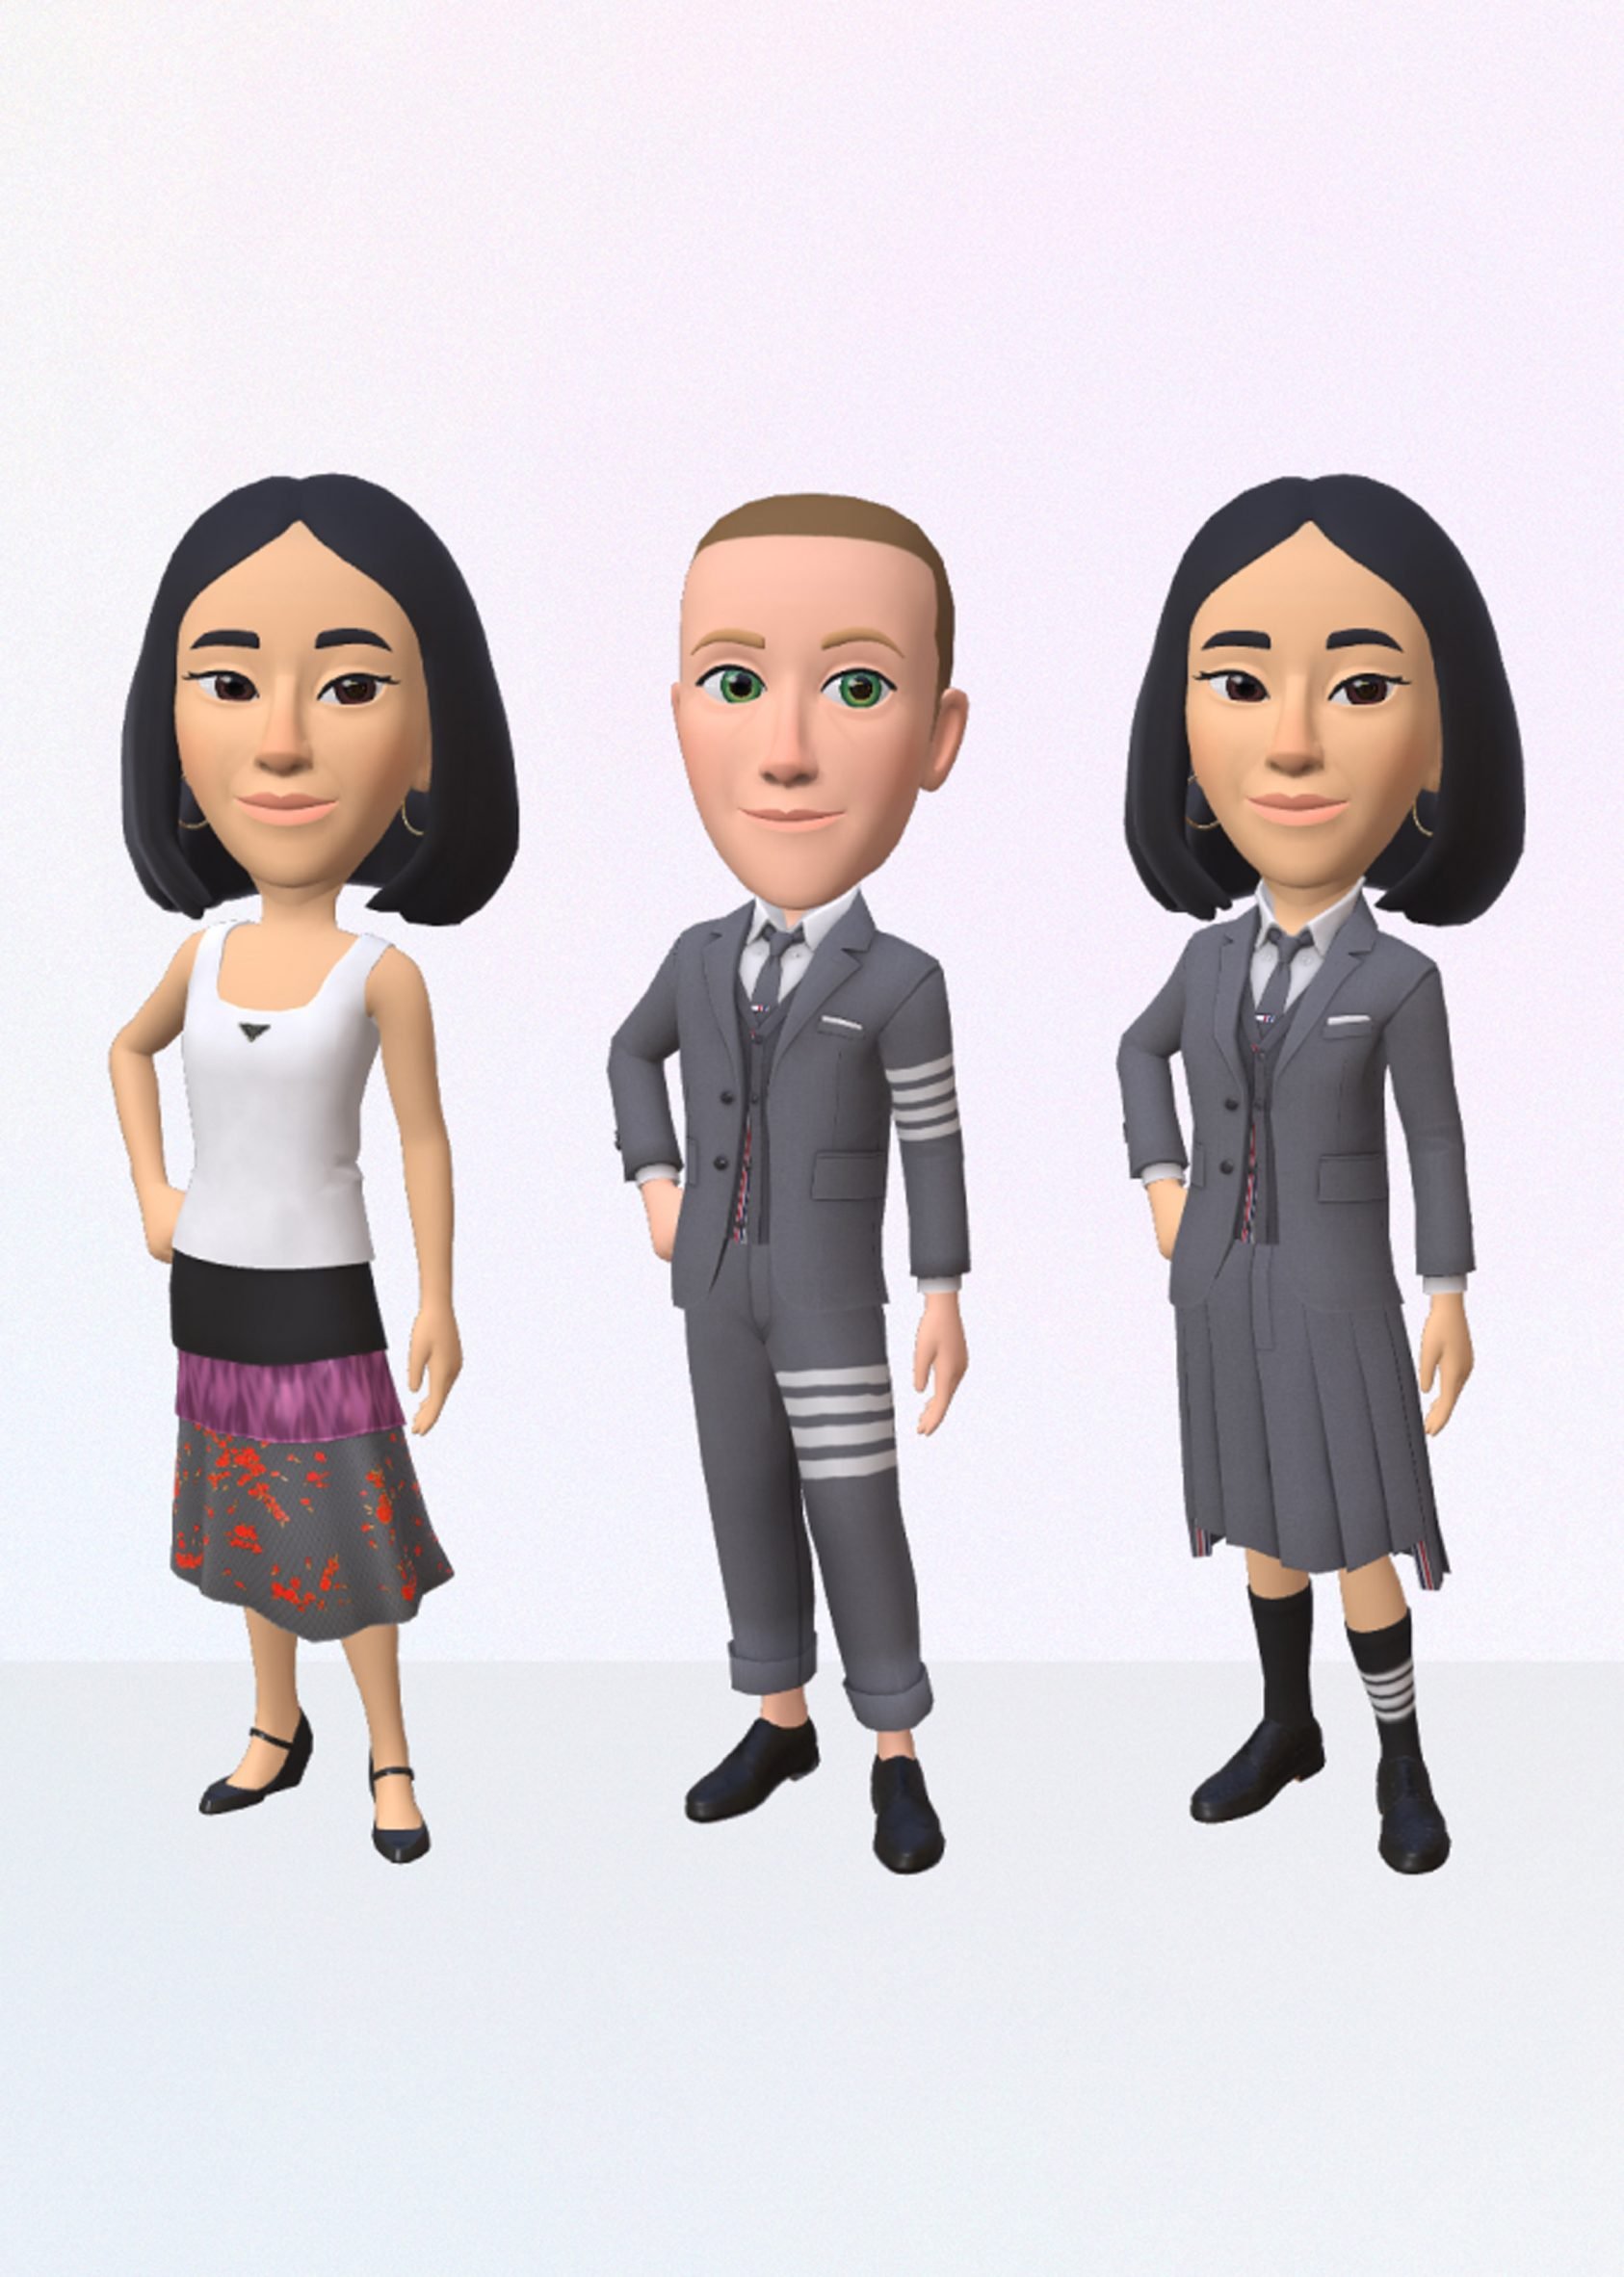 Image of Thom Browne and Prada outfits that are available at Meta's Avatars Store